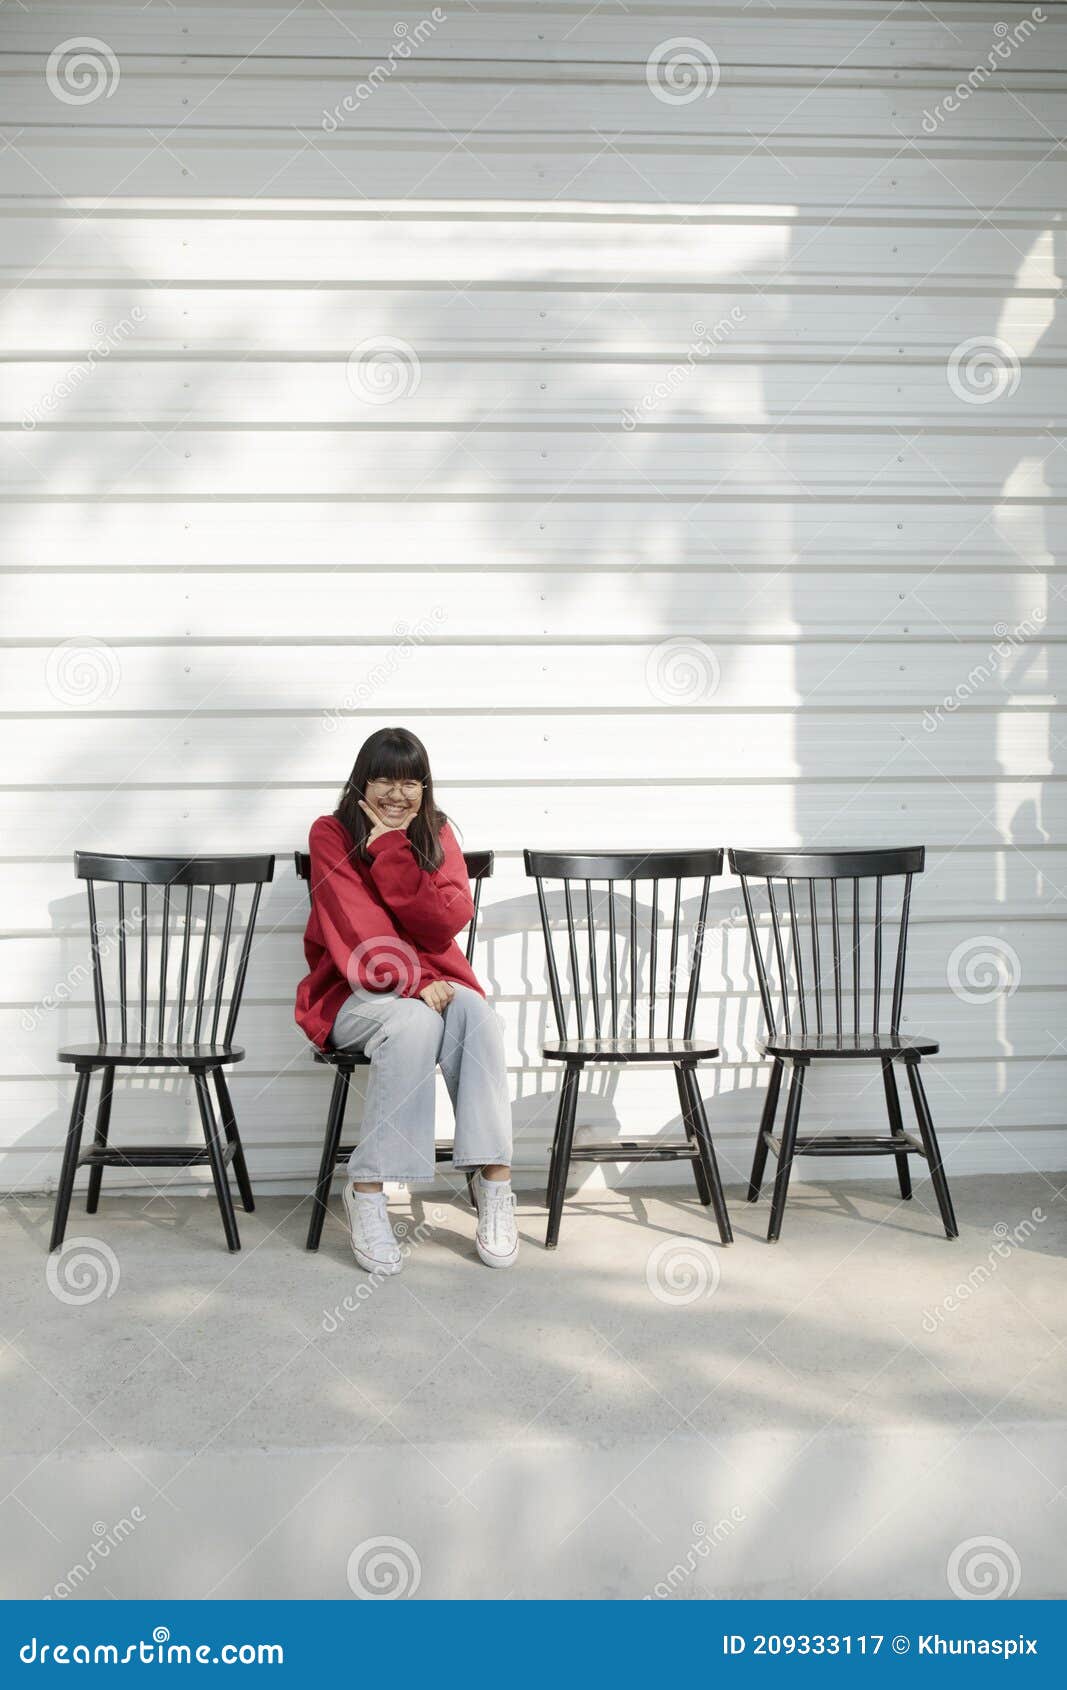 asian teenager sitting on wood desk against white wall background